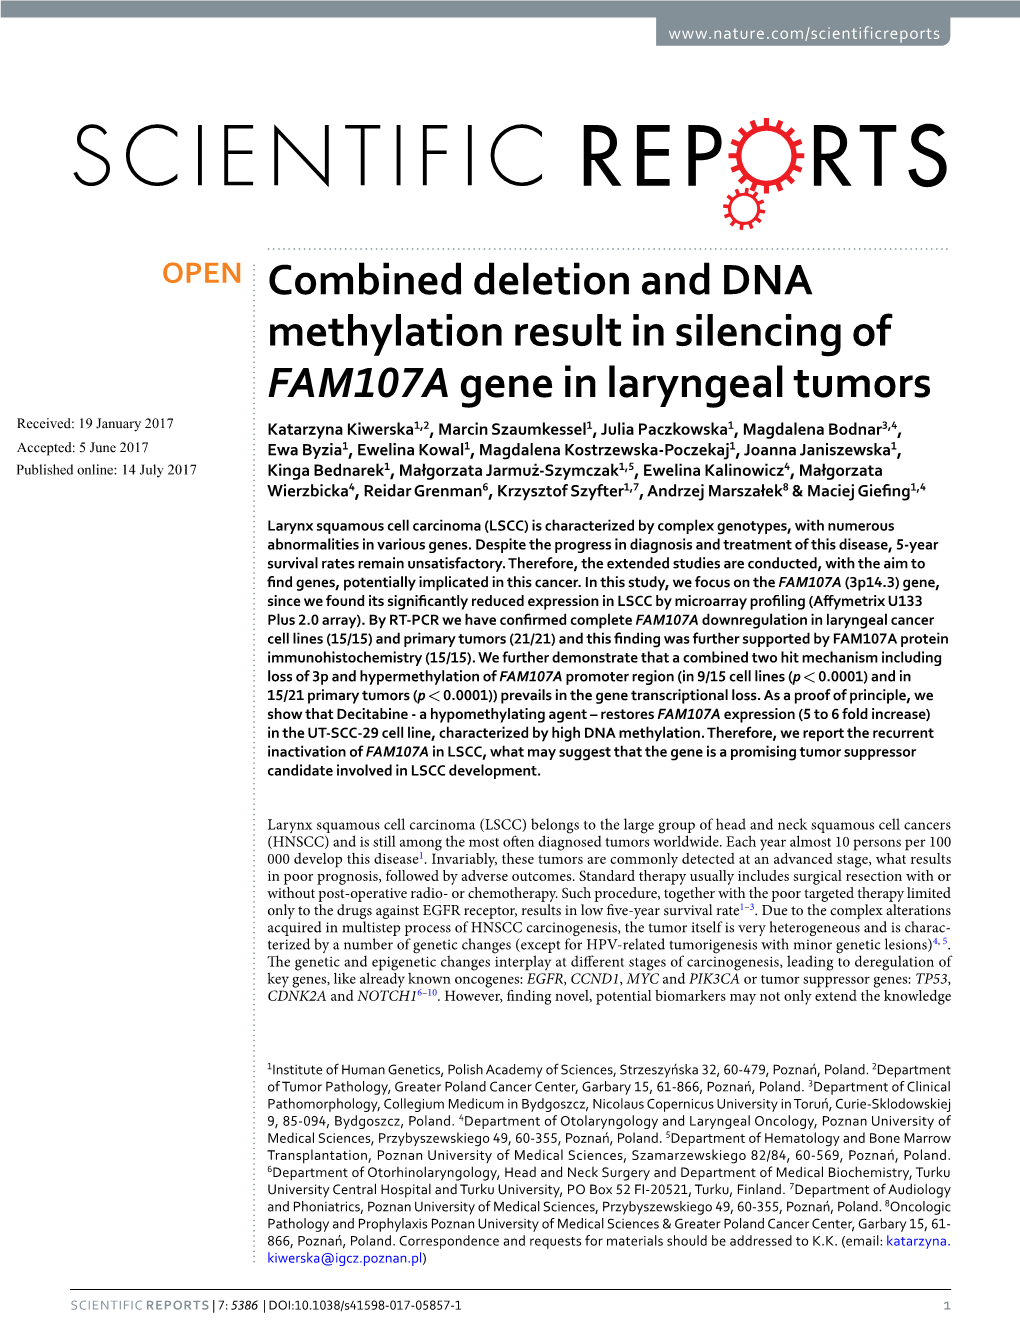 Combined Deletion and DNA Methylation Result in Silencing Of